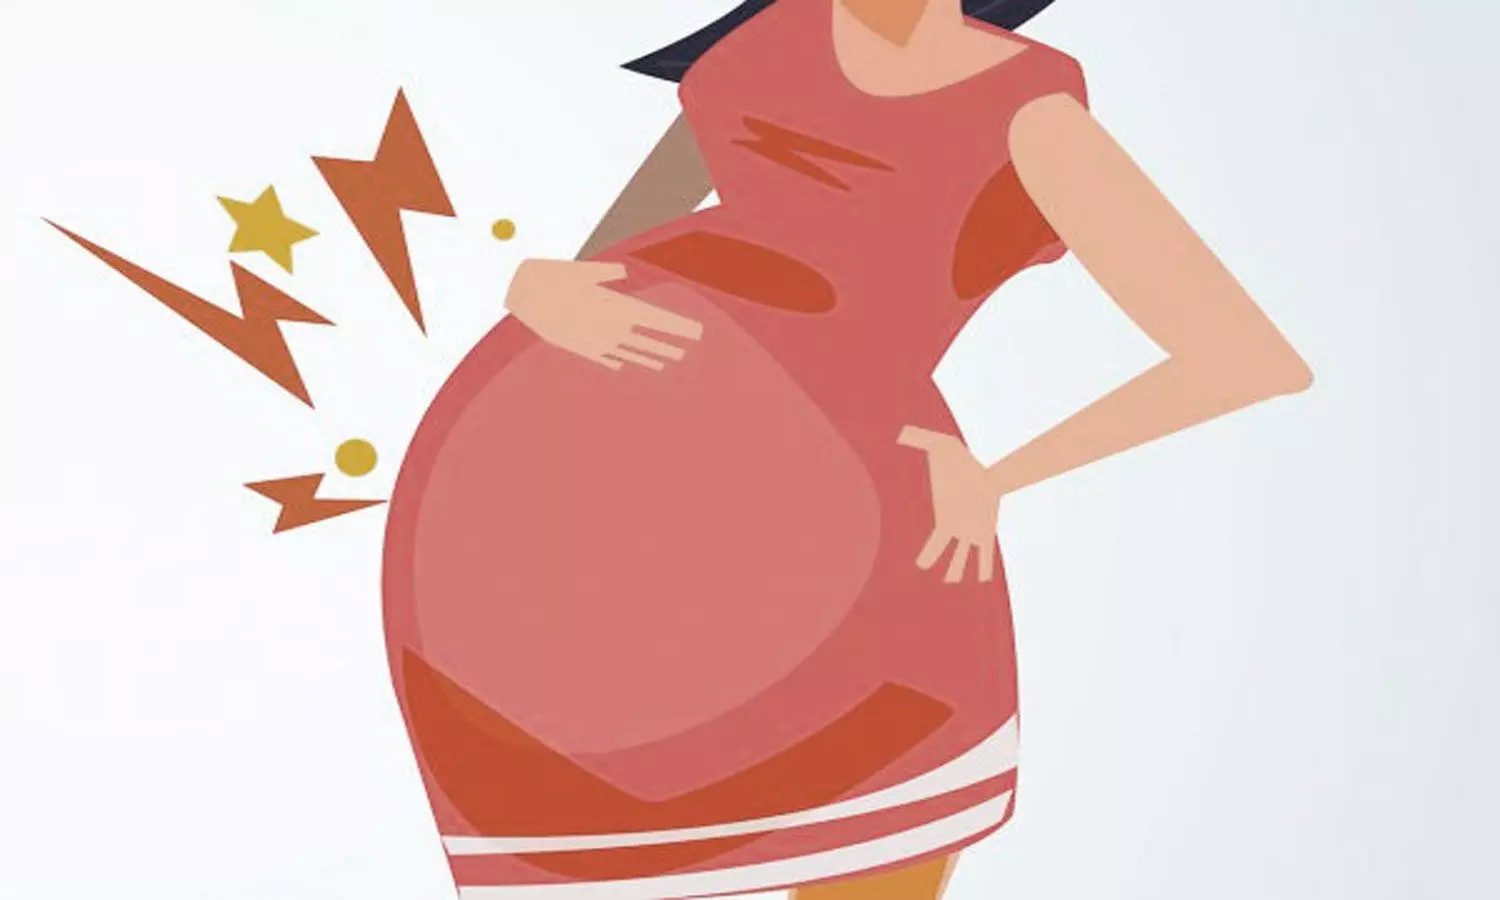 Alterations in the gut microbiota linked to pregnancy complications